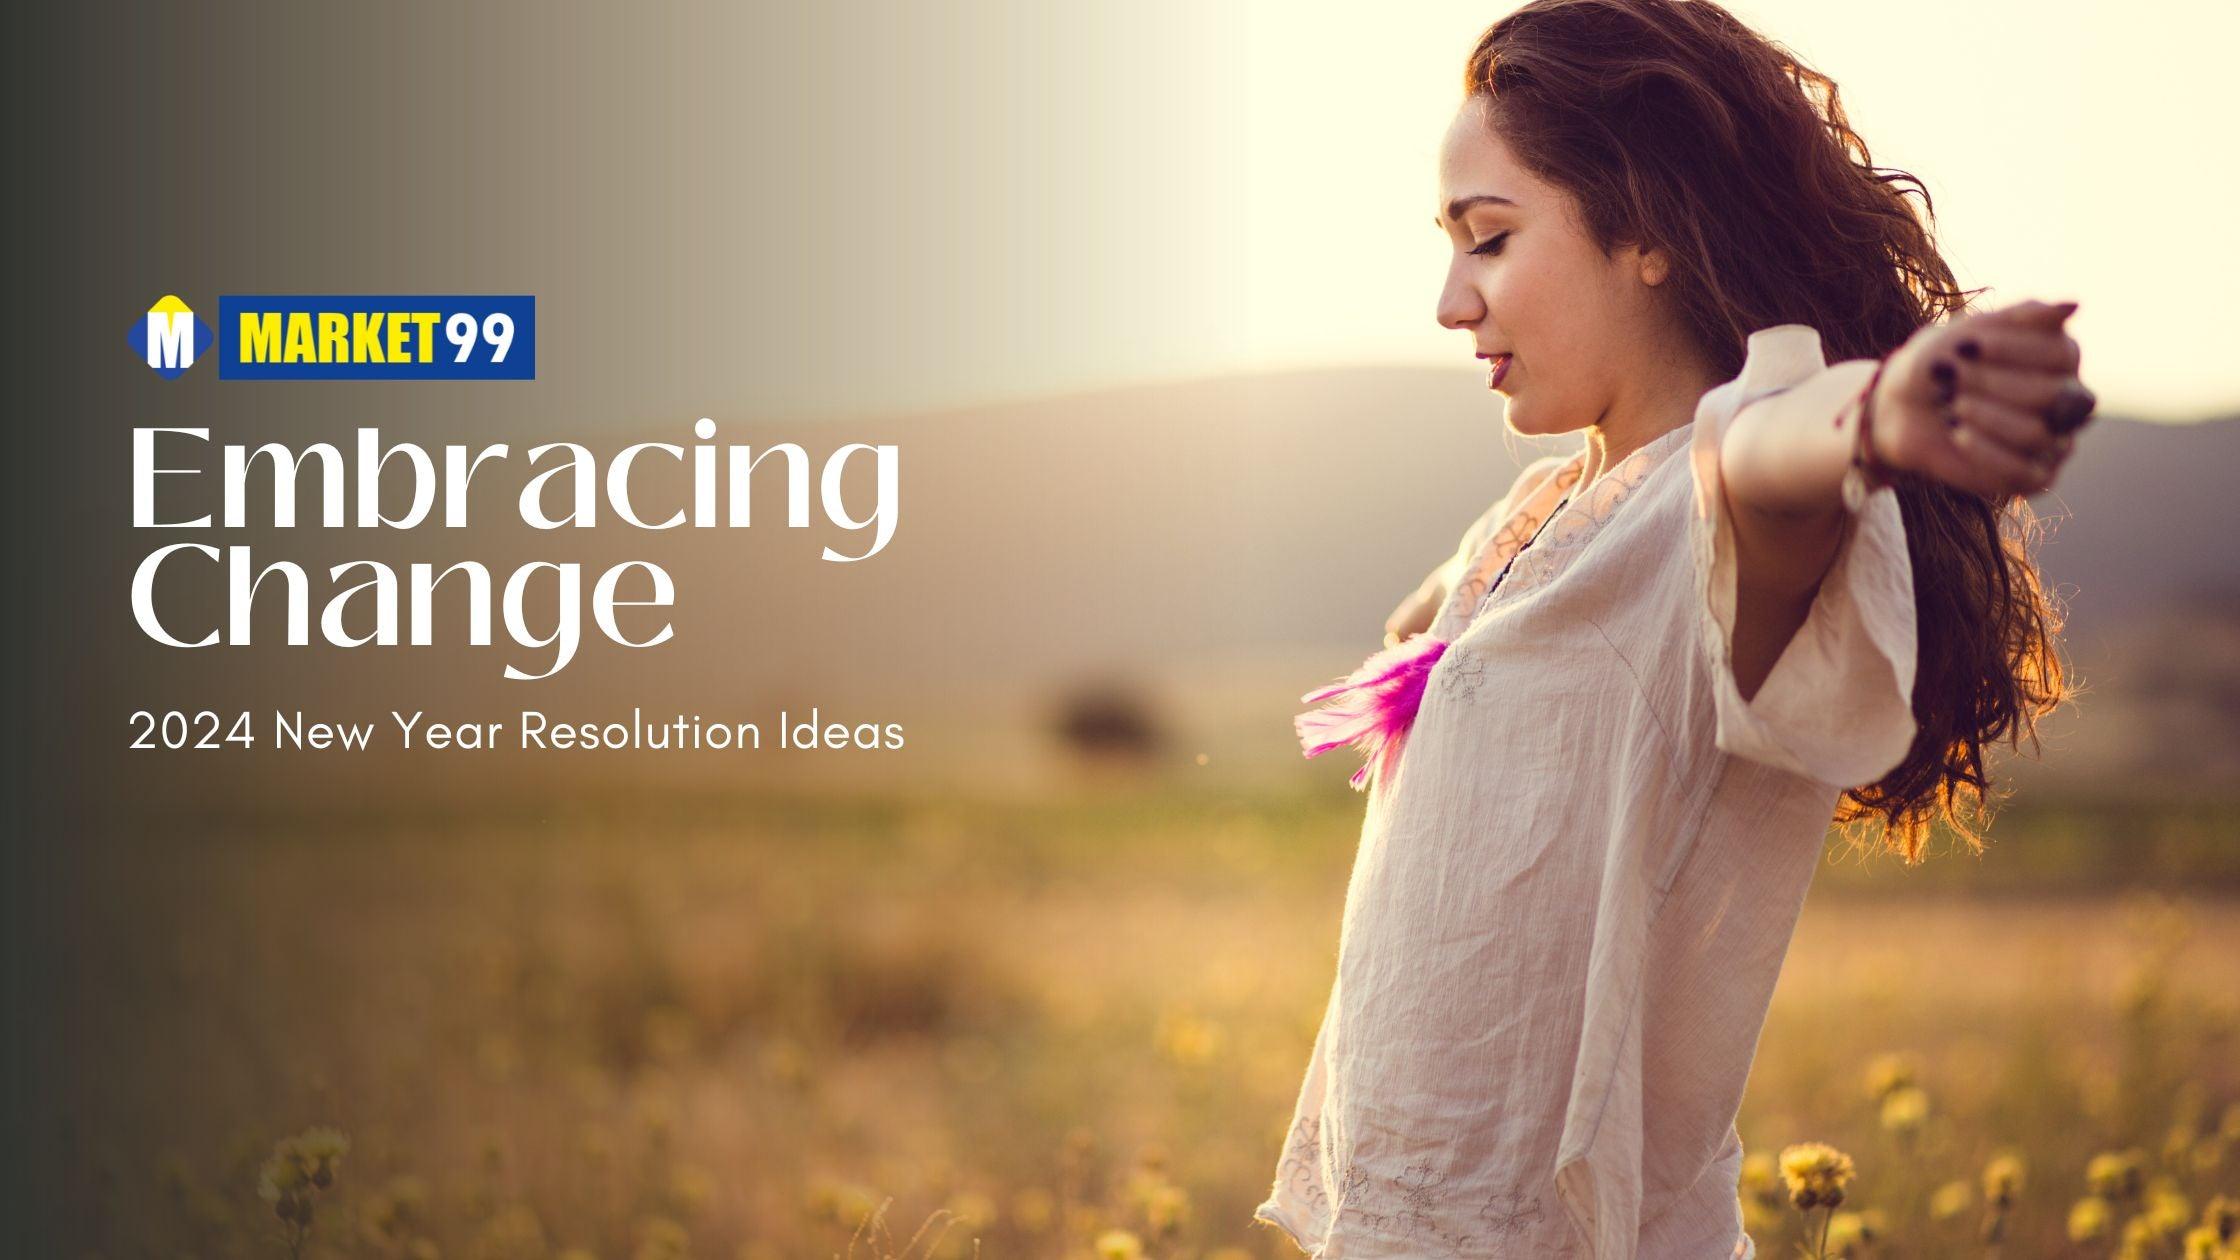 Embracing Change: 10 Fresh New Year Resolution Ideas to Transform Your Life